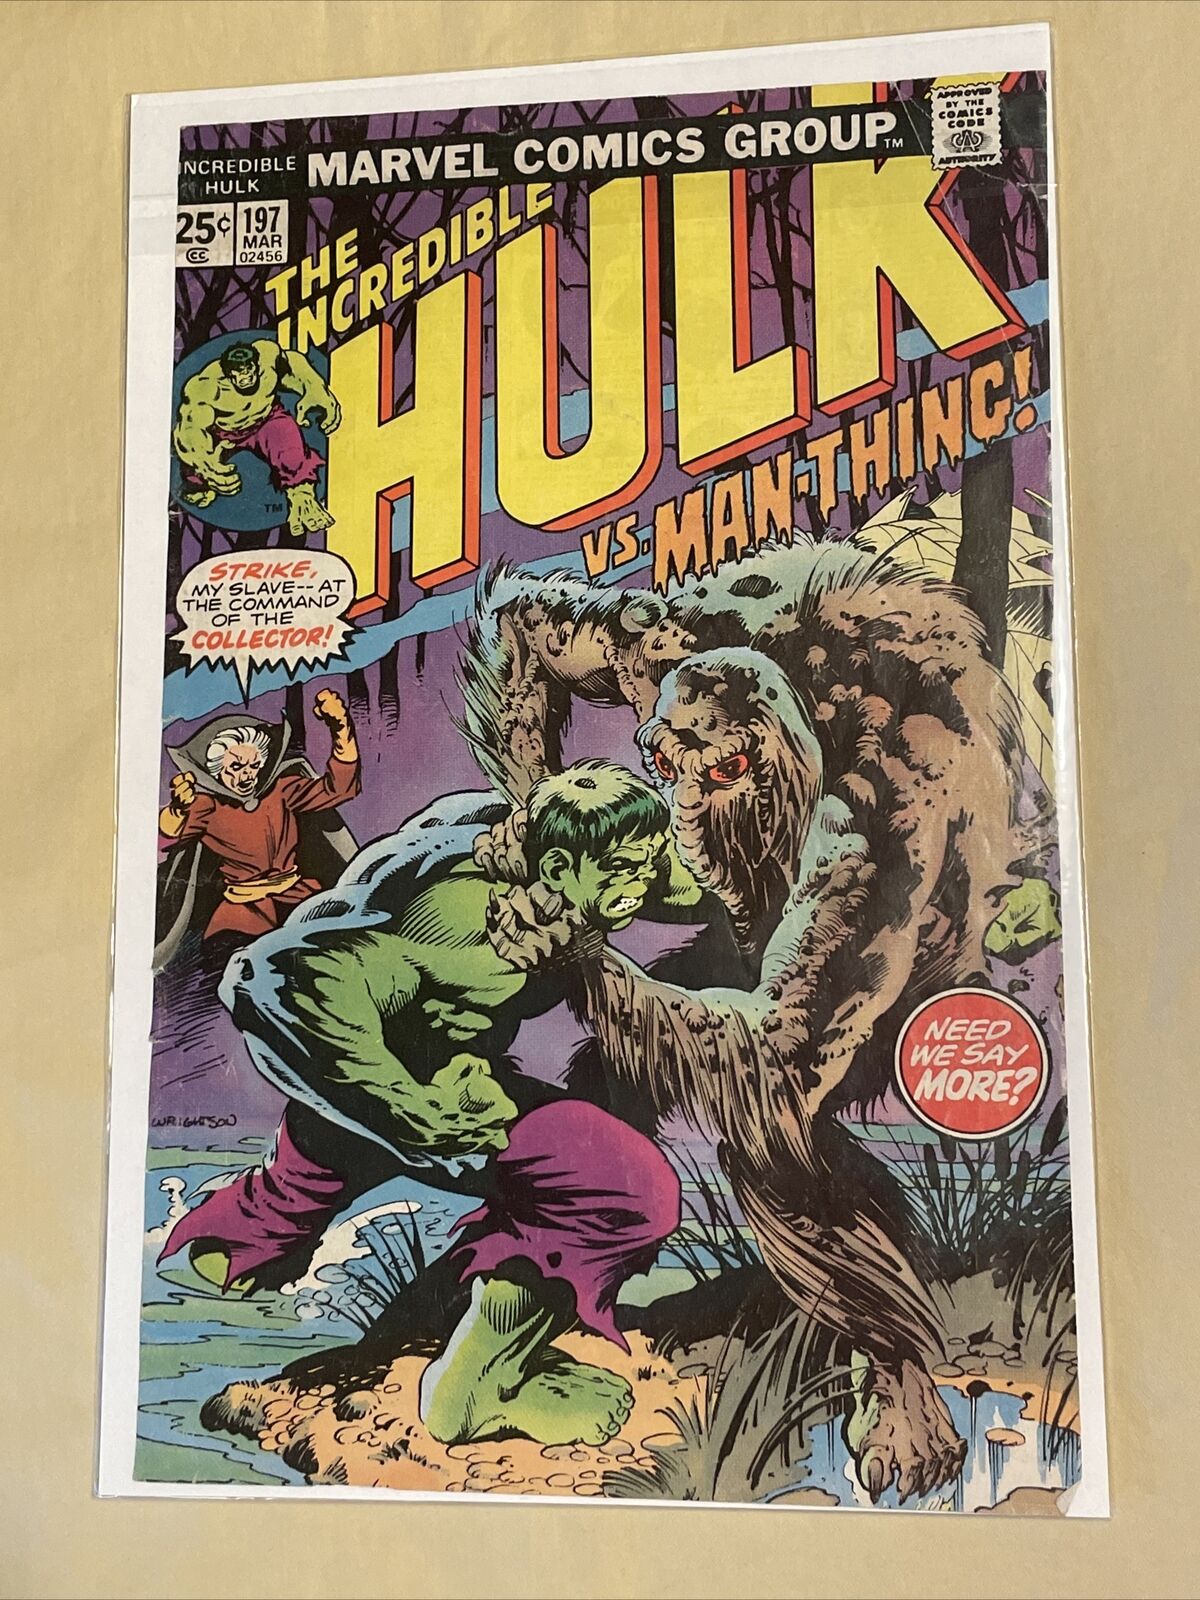 **COVER ONLY** VINTAGE COMIC MARVEL INCREDIBLE HULK #197 MAR 25¢ VS MAN-THING